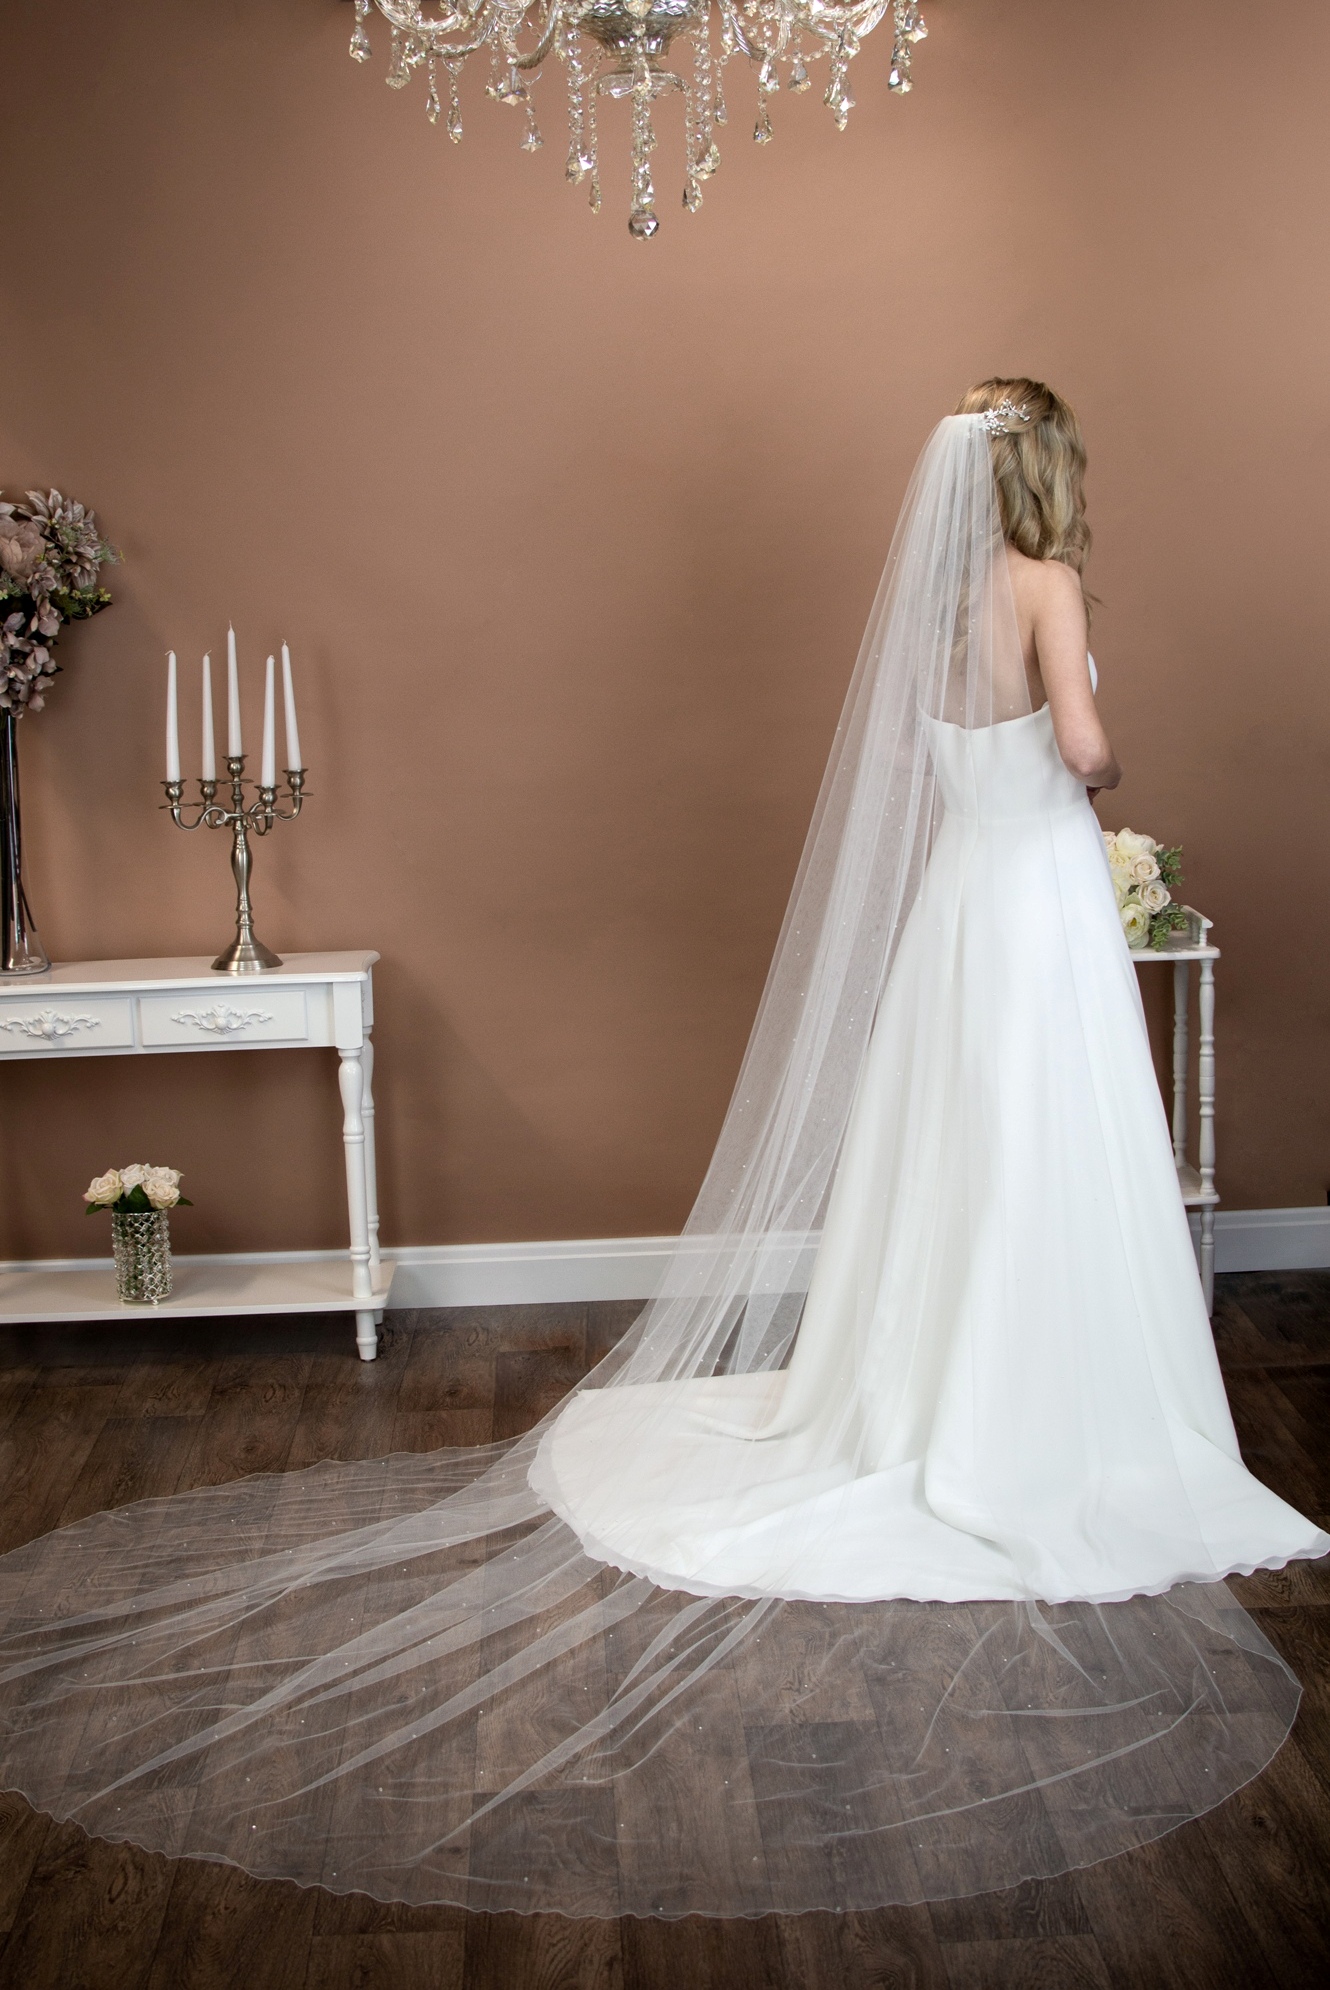 Alexis cathedral length veil